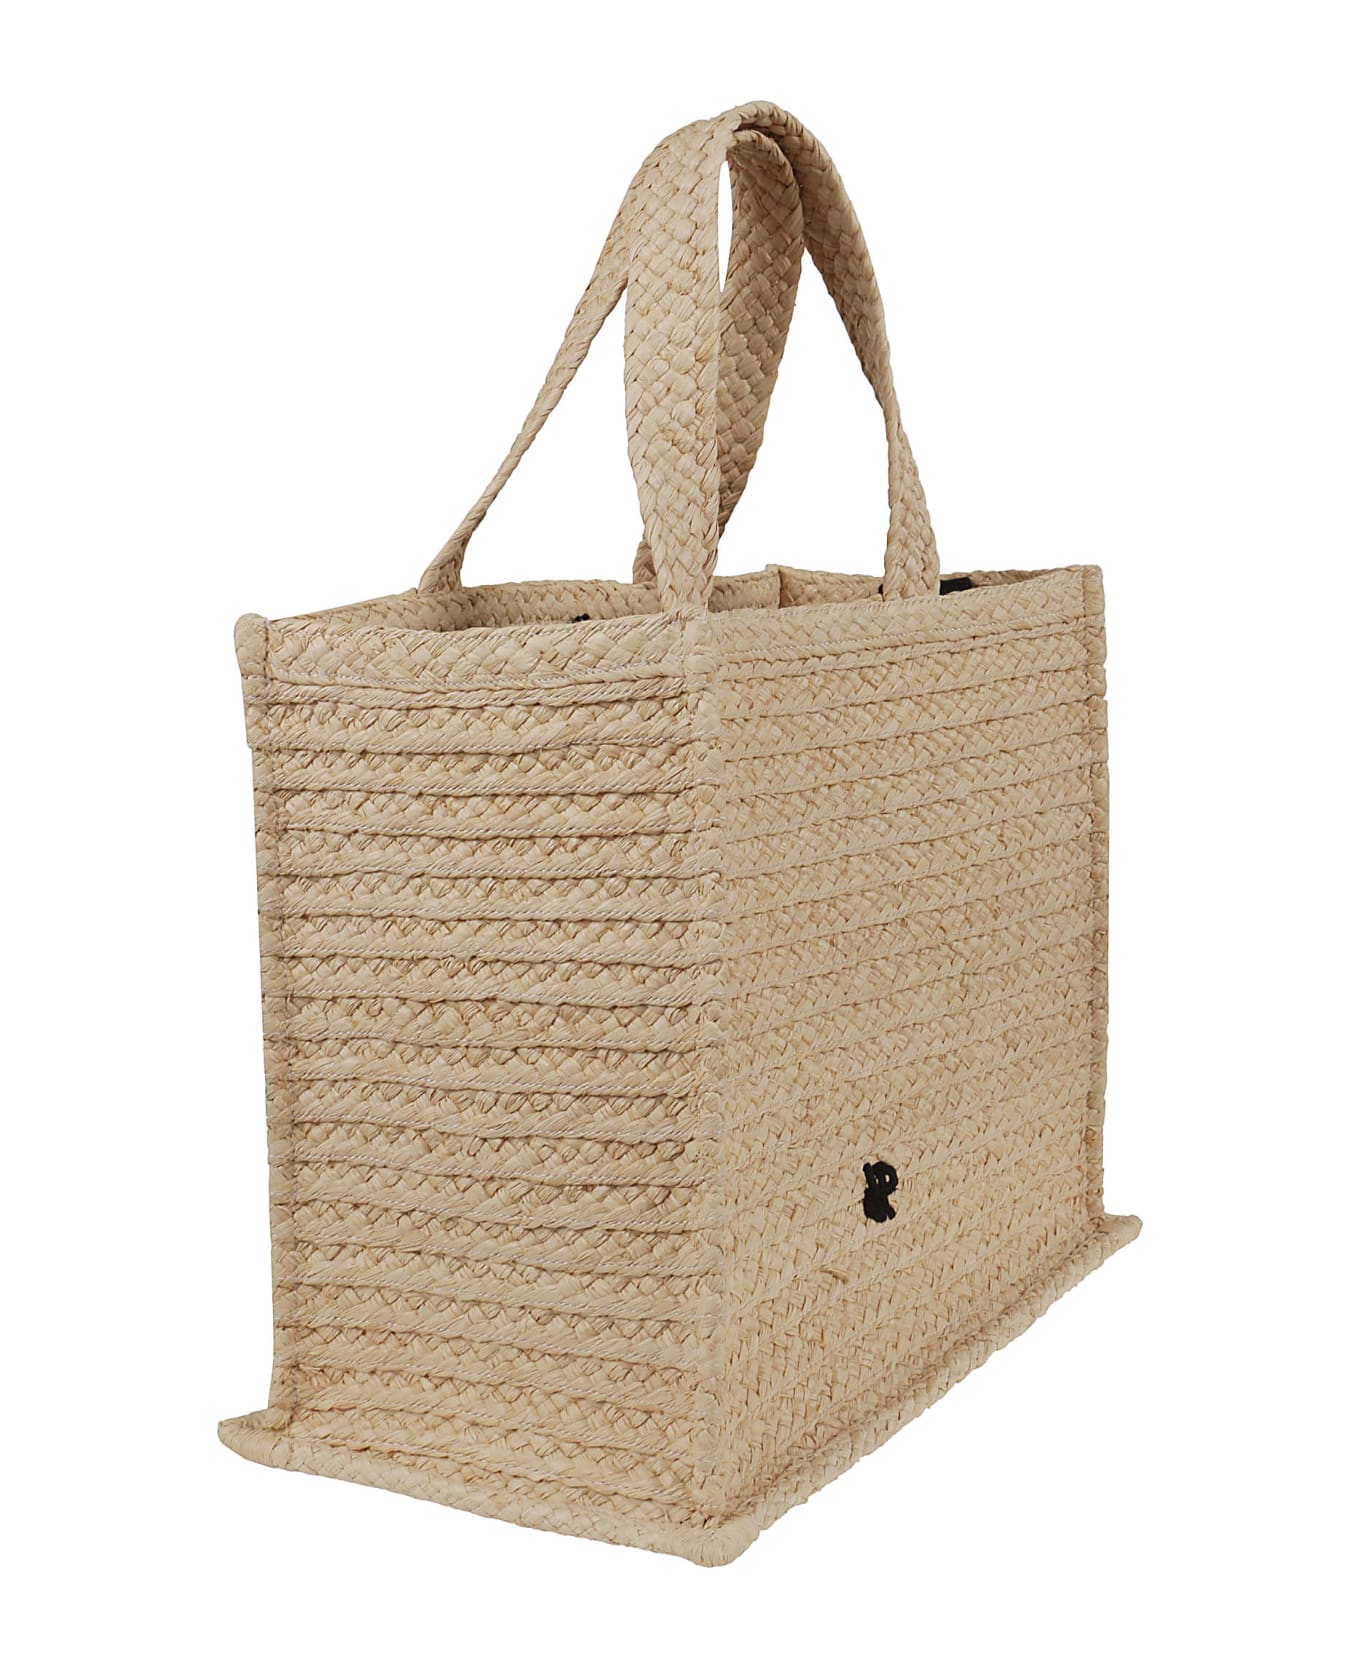 Patou Large Tote Bag - BEIGE トートバッグ